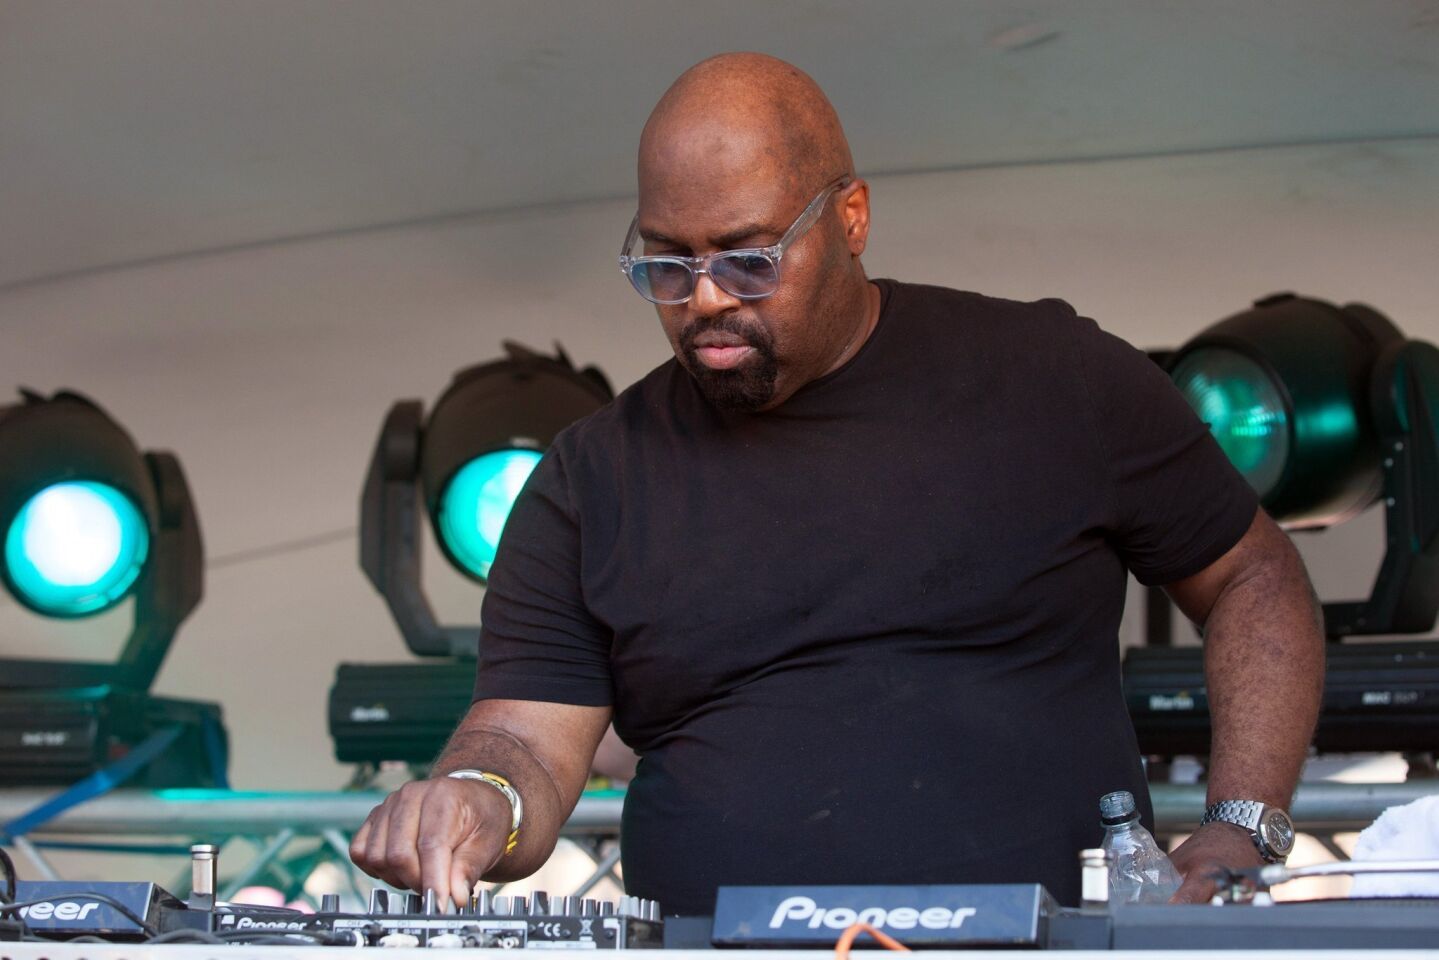 Often called the "godfather" of house music, Frankie Knuckles was instrumental in launching the electronic dance music movement in the late 1970s. He was 59.